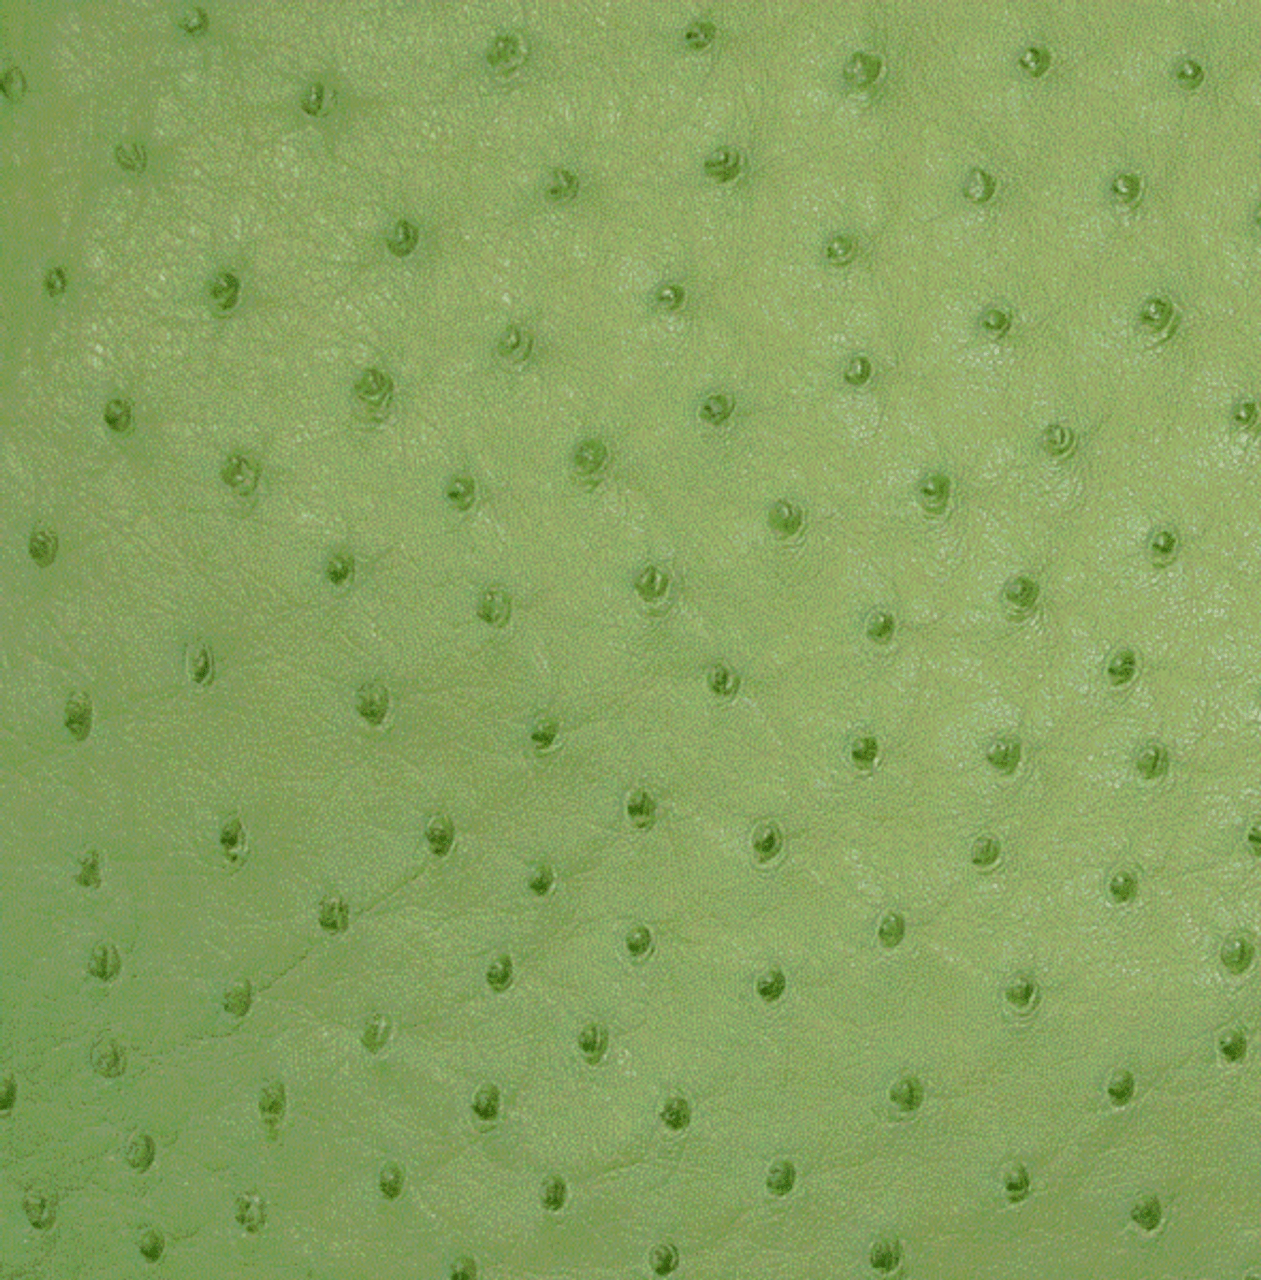 Ostrich Skin Leather - PATTE GREEN - 16.36 sq ft - Grade 2